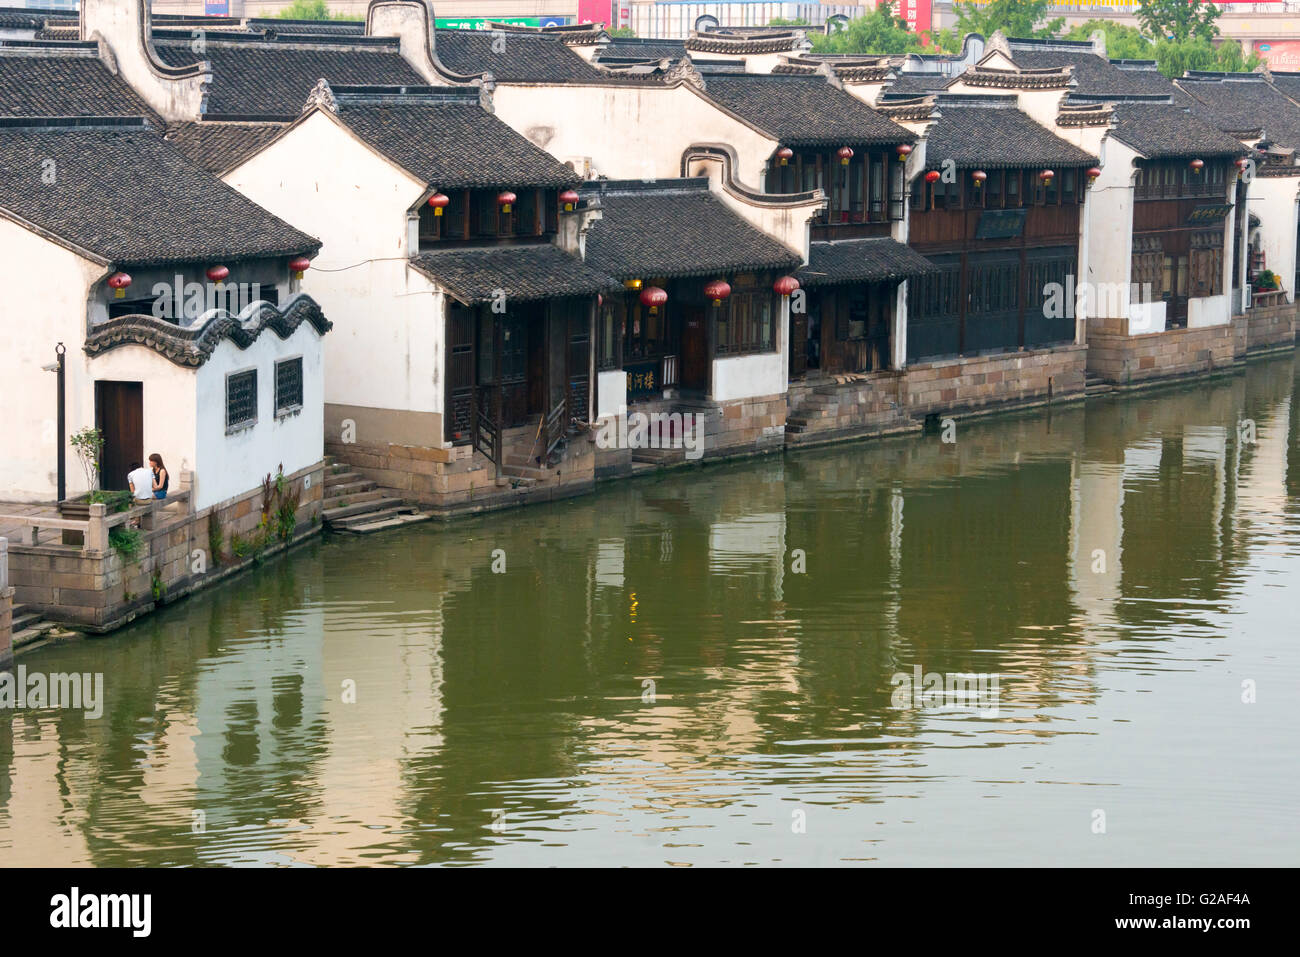 Traditionelle Häuser entlang des Canal Grande, alte Stadt von Yuehe in Jiaxing, Zhejiang Provinz, China Stockfoto